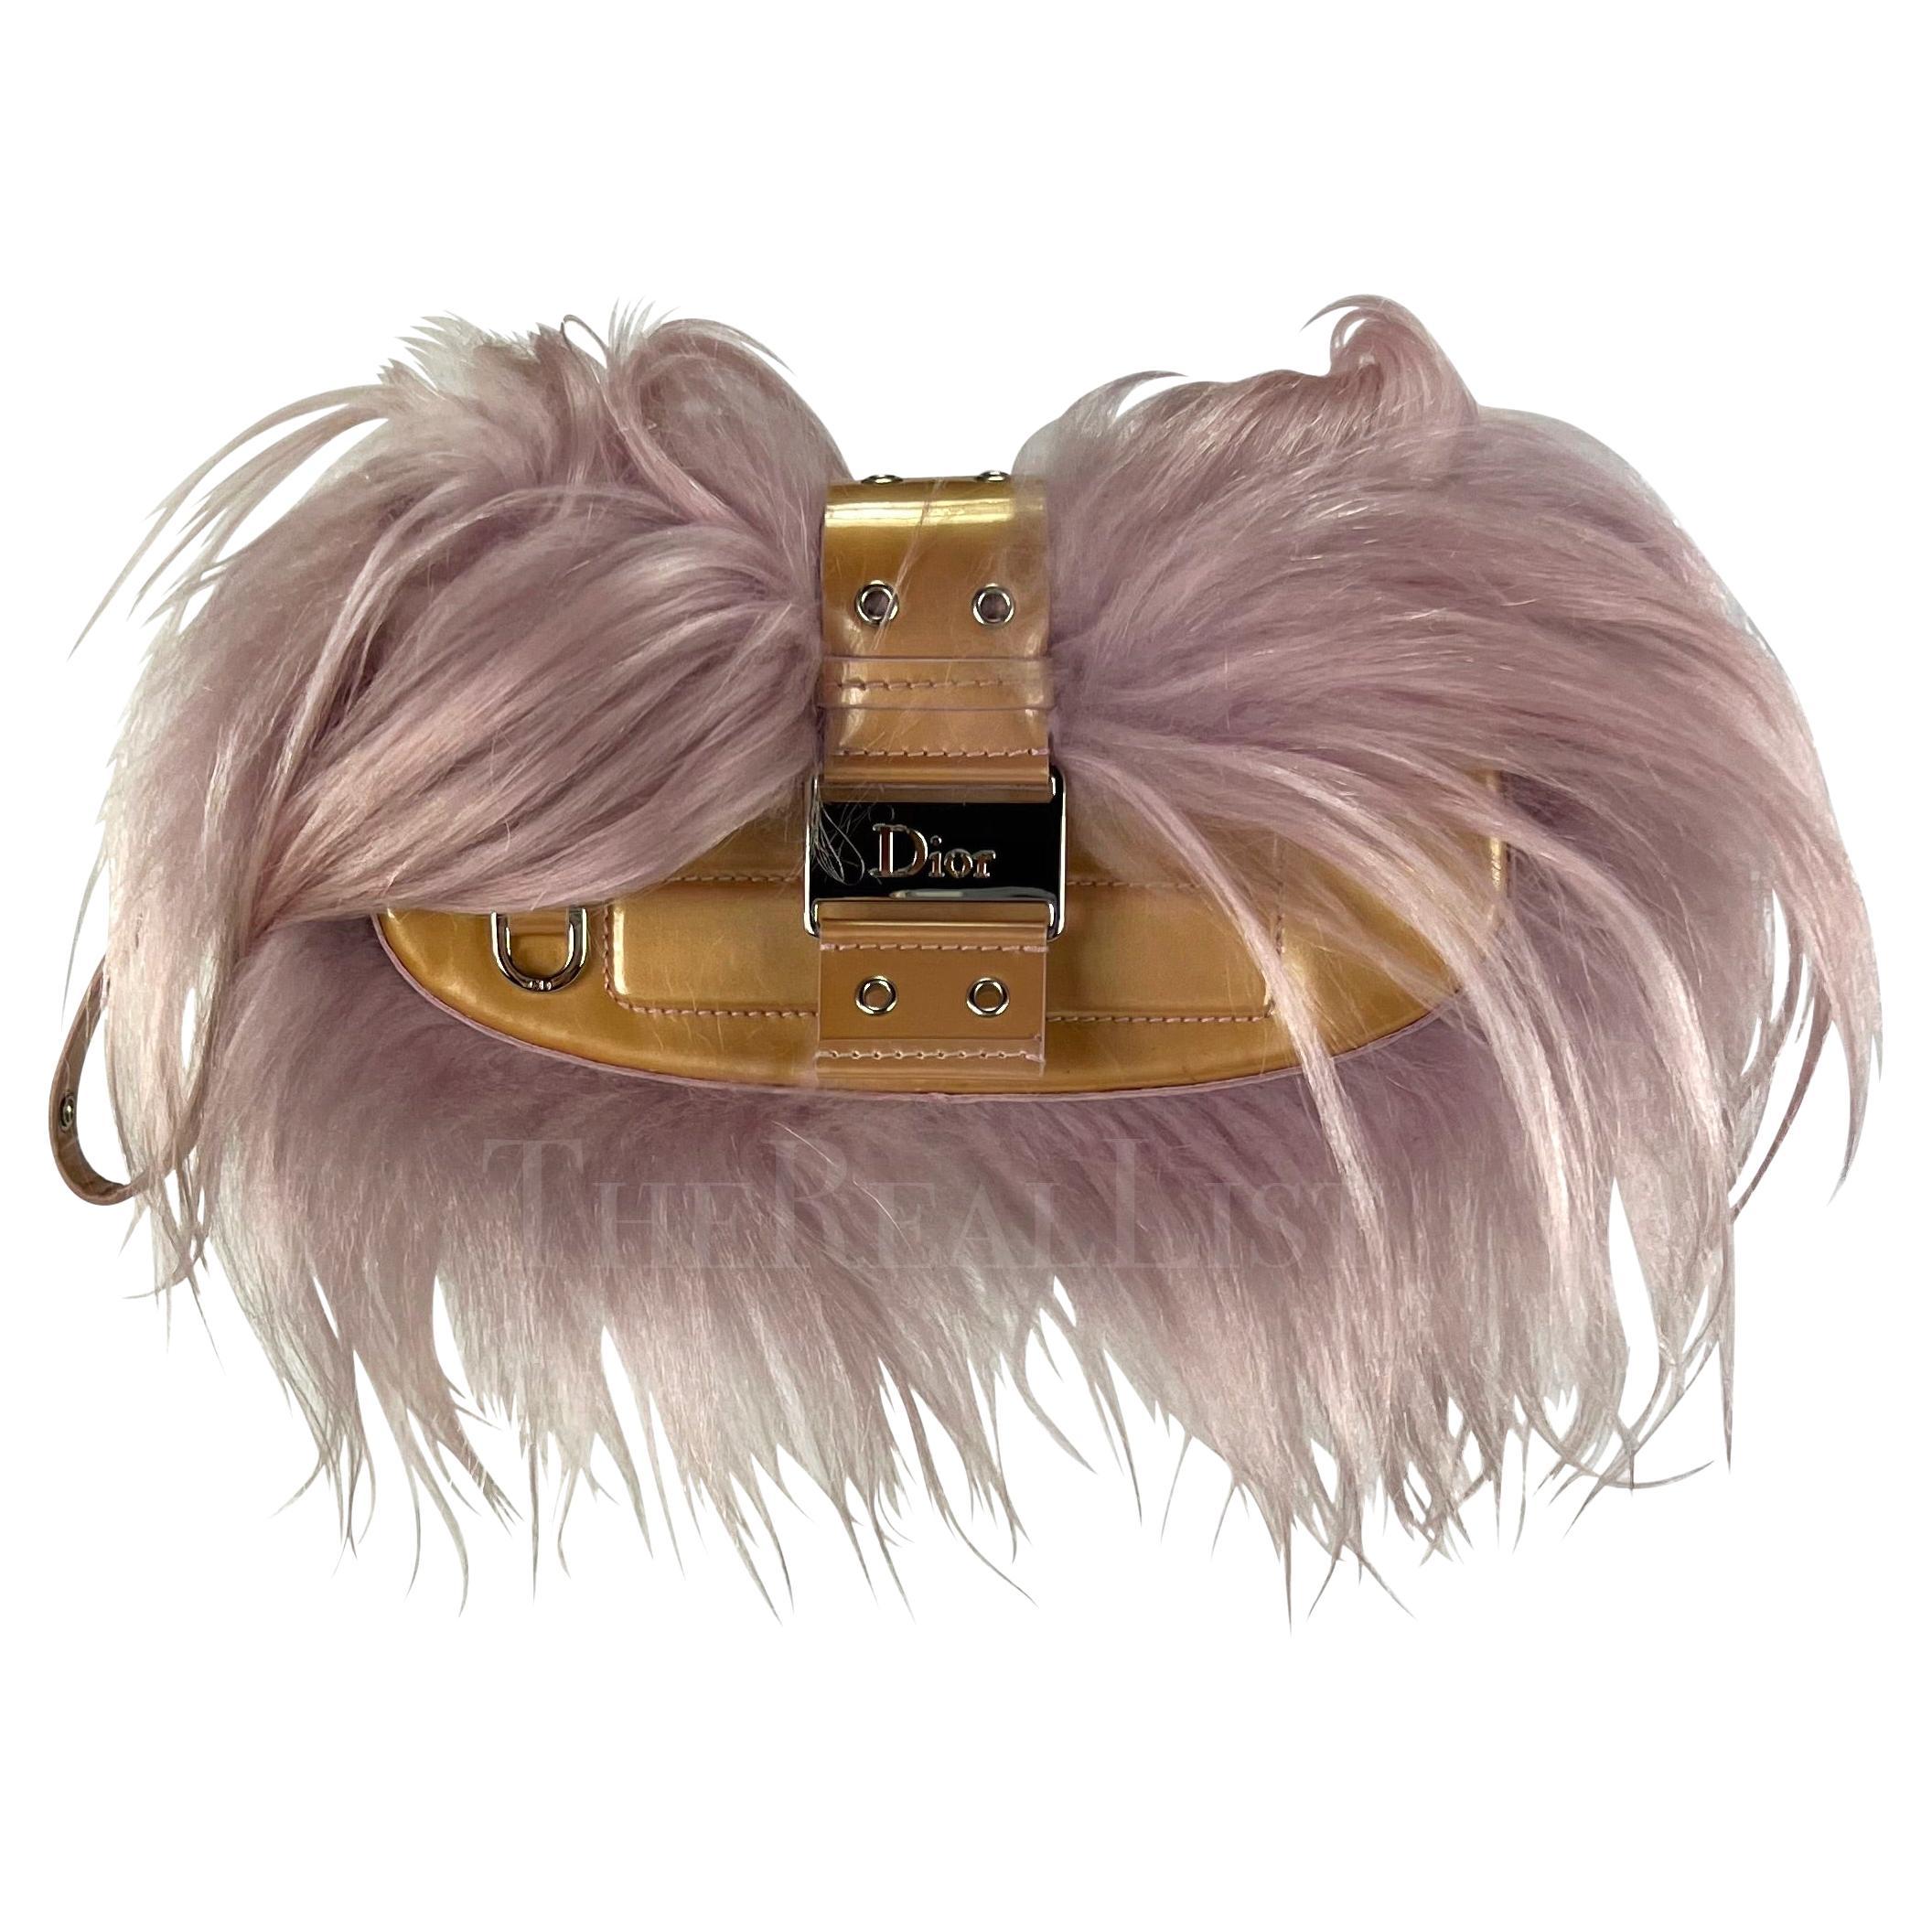 F/W 2003 Christian Dior by John Galliano Light Pink Fur Colombus Clutch Wristlet For Sale